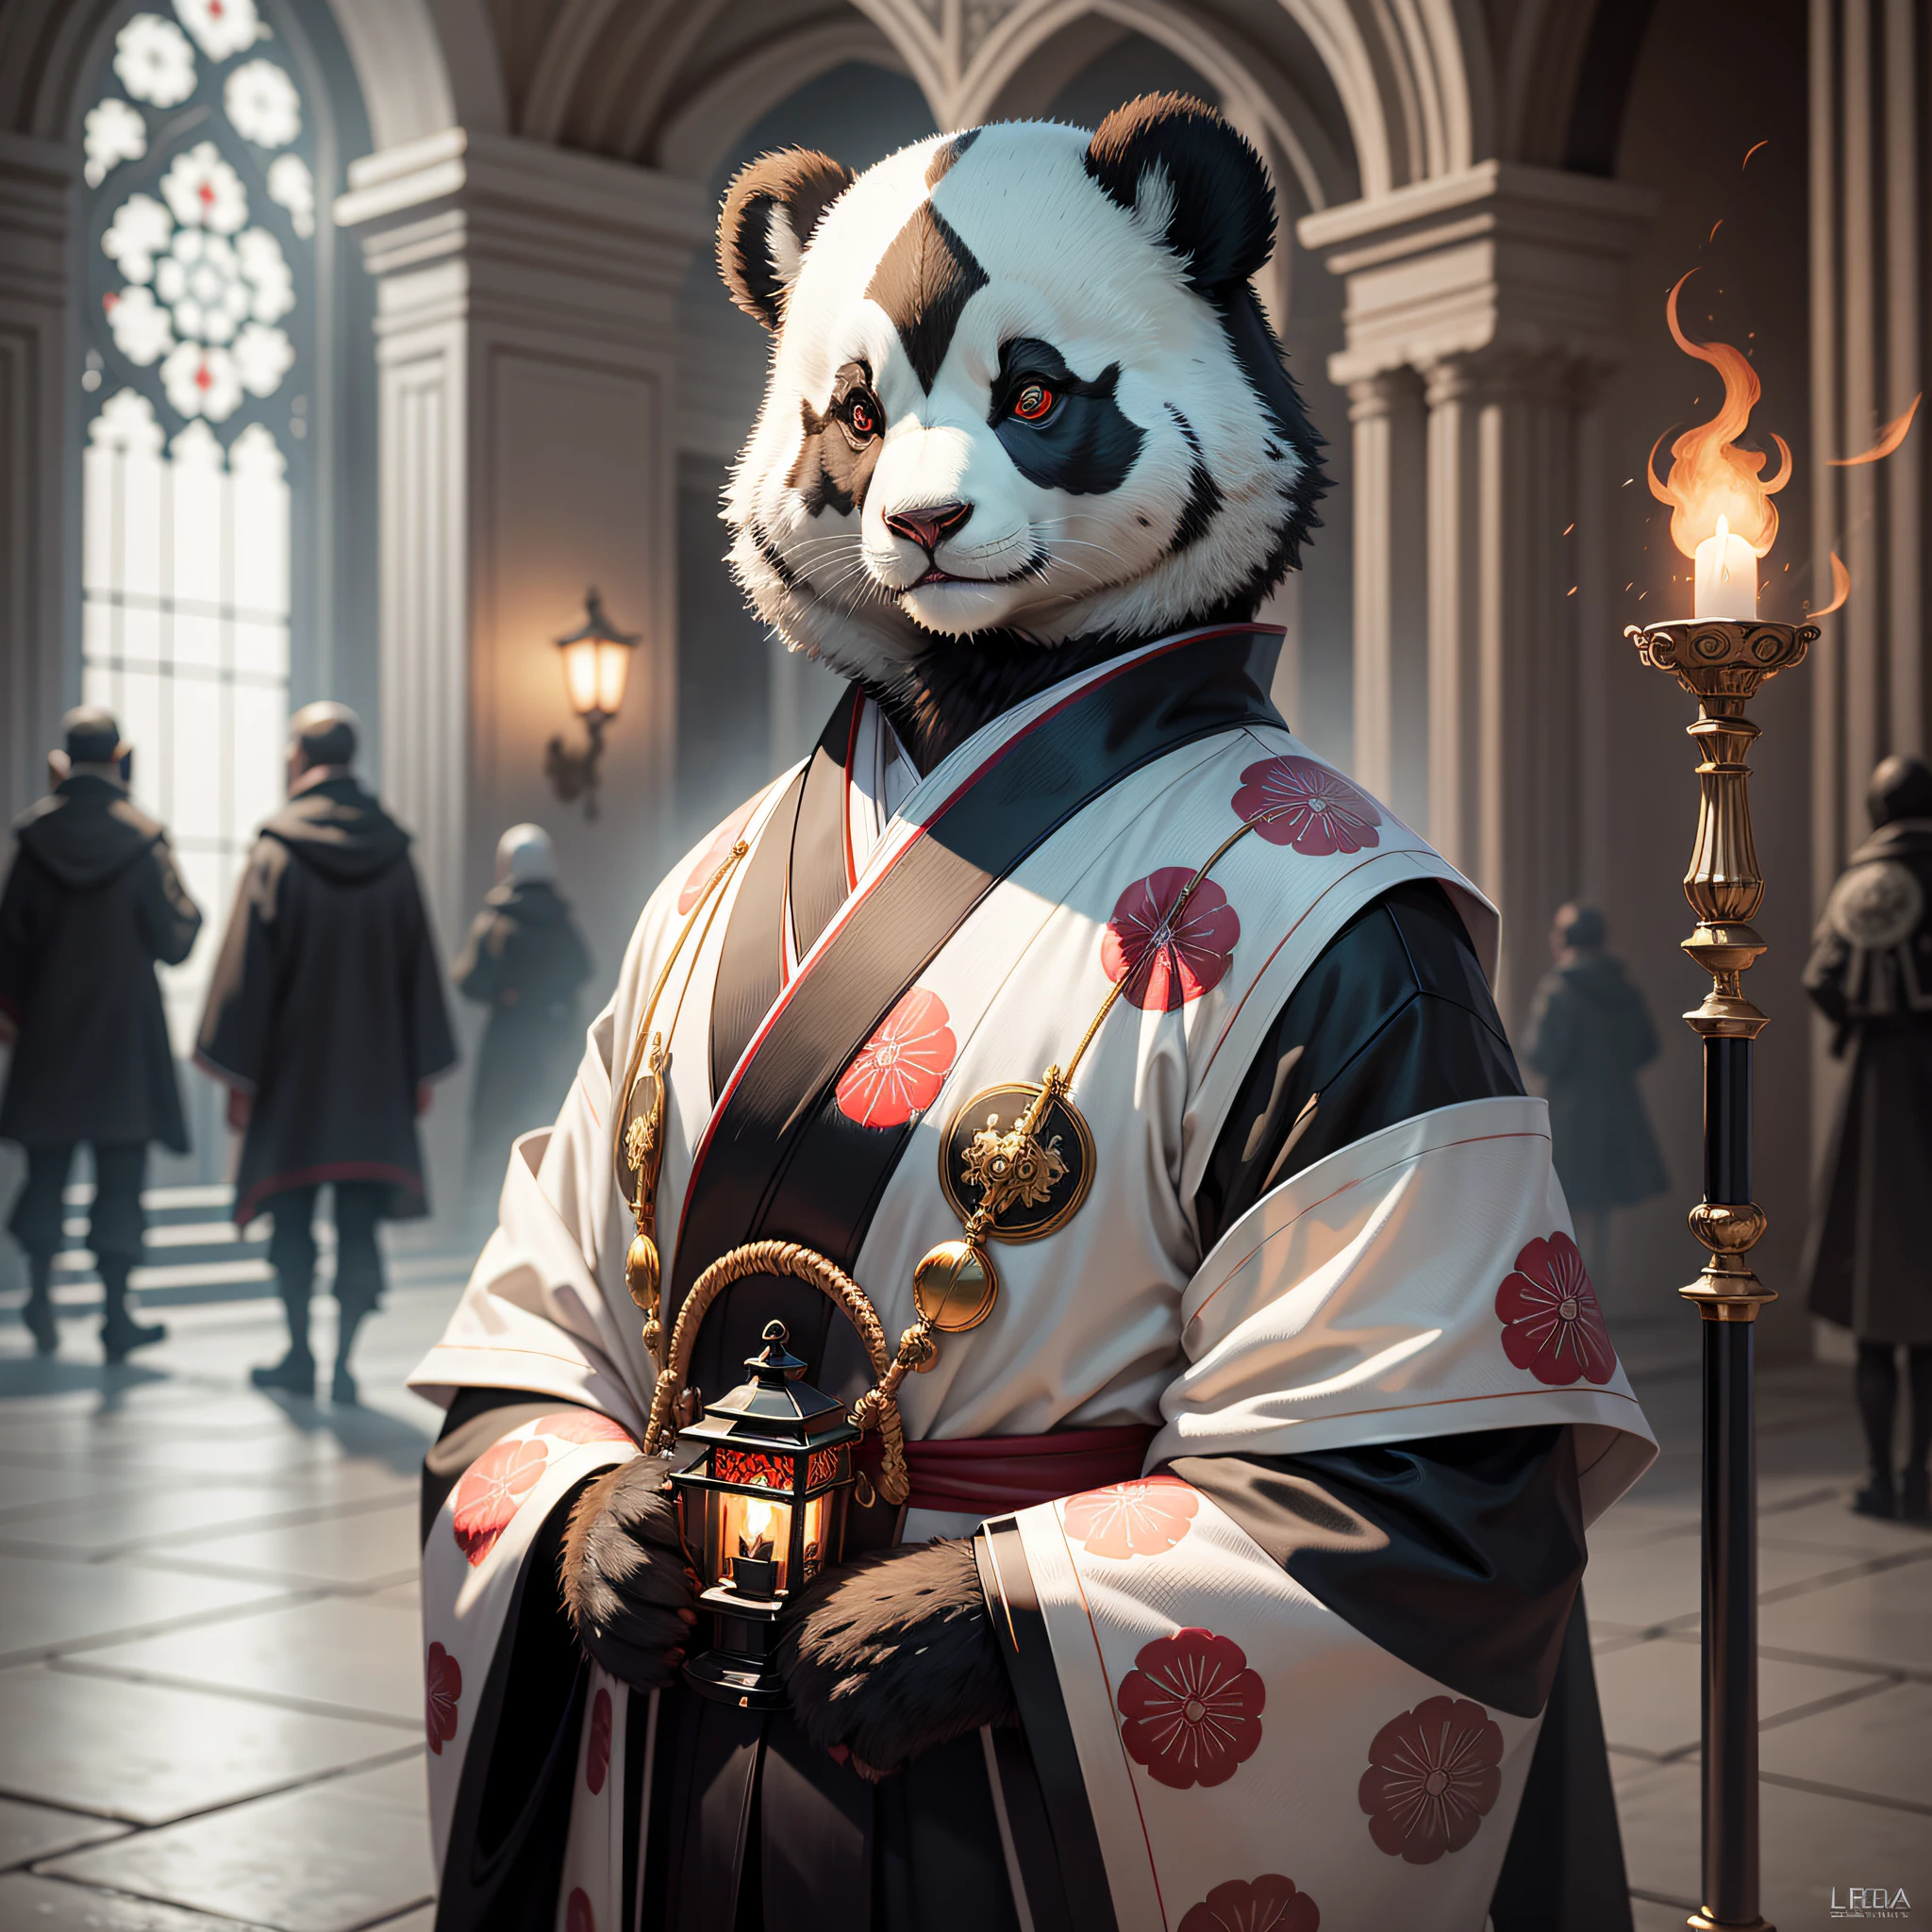 extremely detailed 8k wallpaper), intricate, richly detailed, dramatic, Panda bear with white kimono, ready for combat, Sinister face is drawn with only a pair of red eyes peeking underneath, graphics insanely, light is reflected in the ornaments, bright ashes ooze from the torches in the vaulted passage during the leisurely walk through the gloomy cathedral,  Show the whole person with some distance from the surroundings to get your own license.